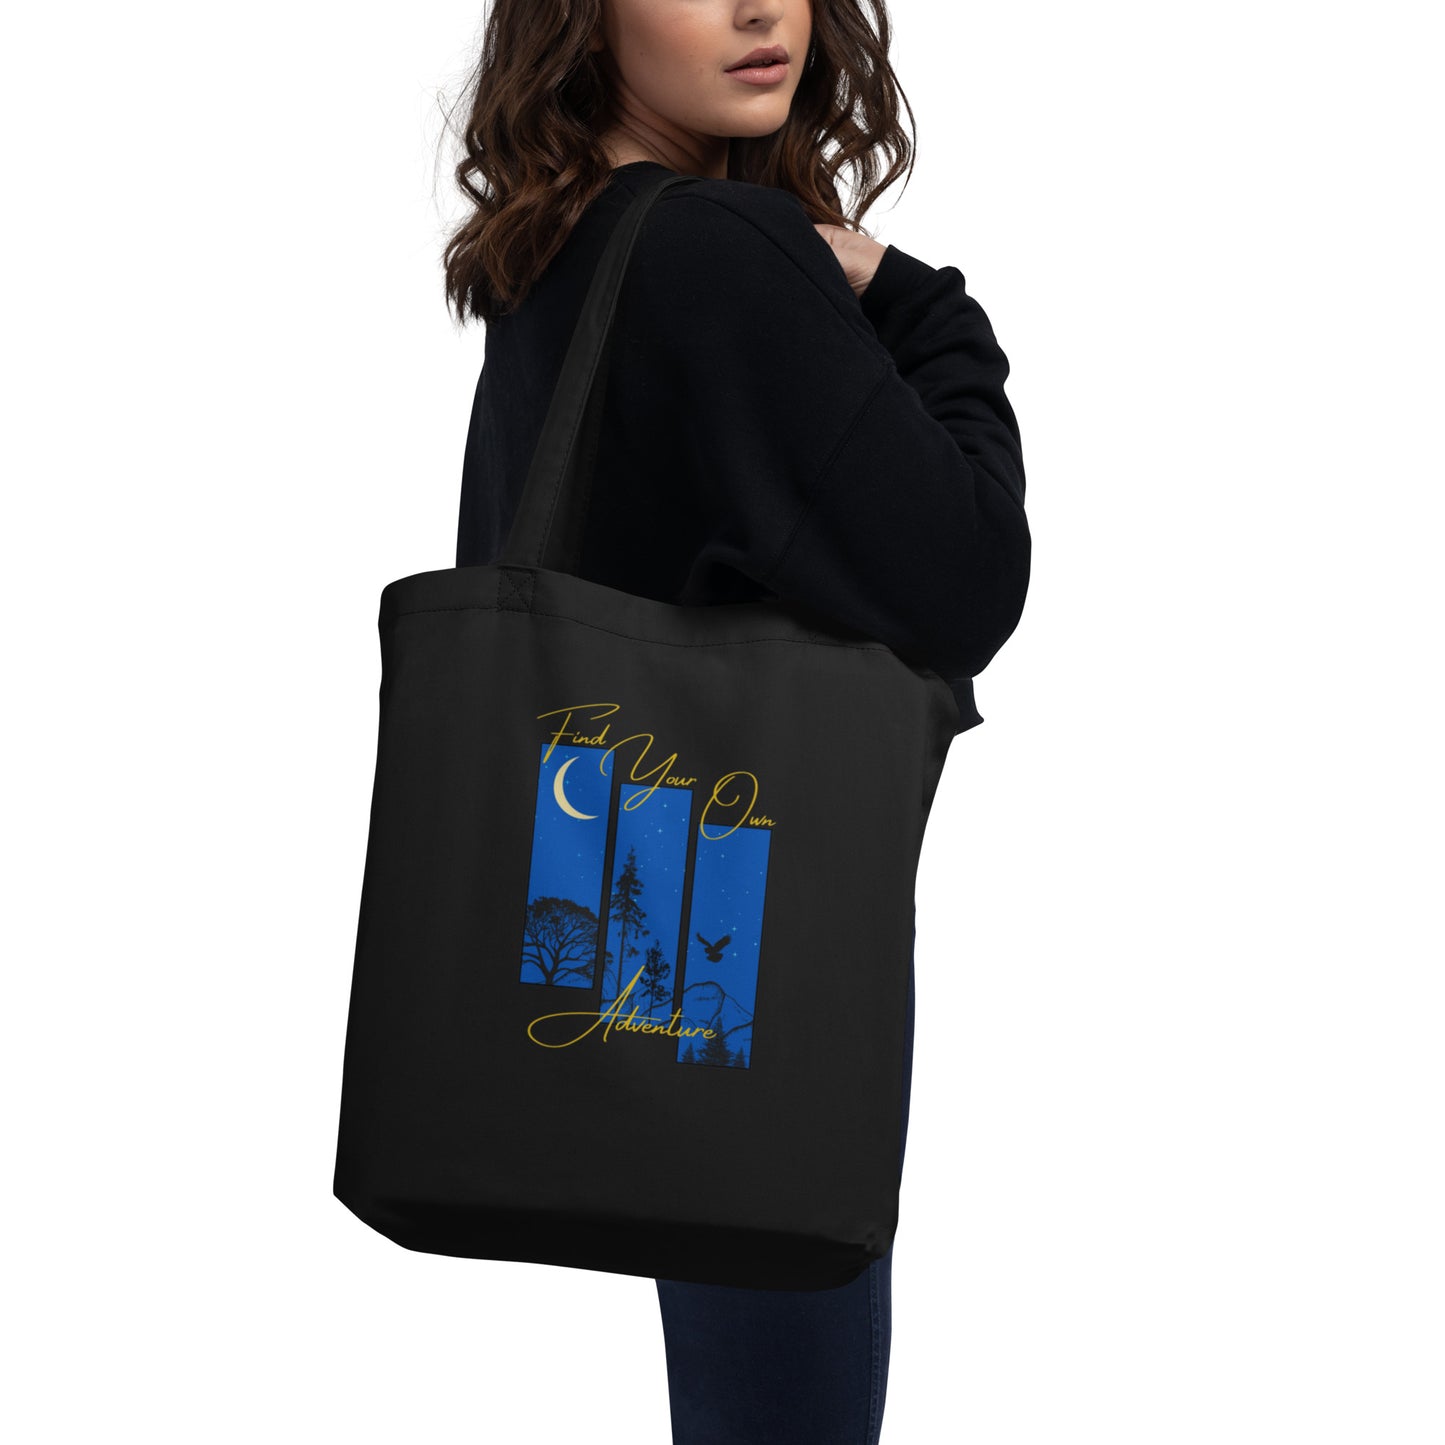 Eco Tote Bag Find your own adventure